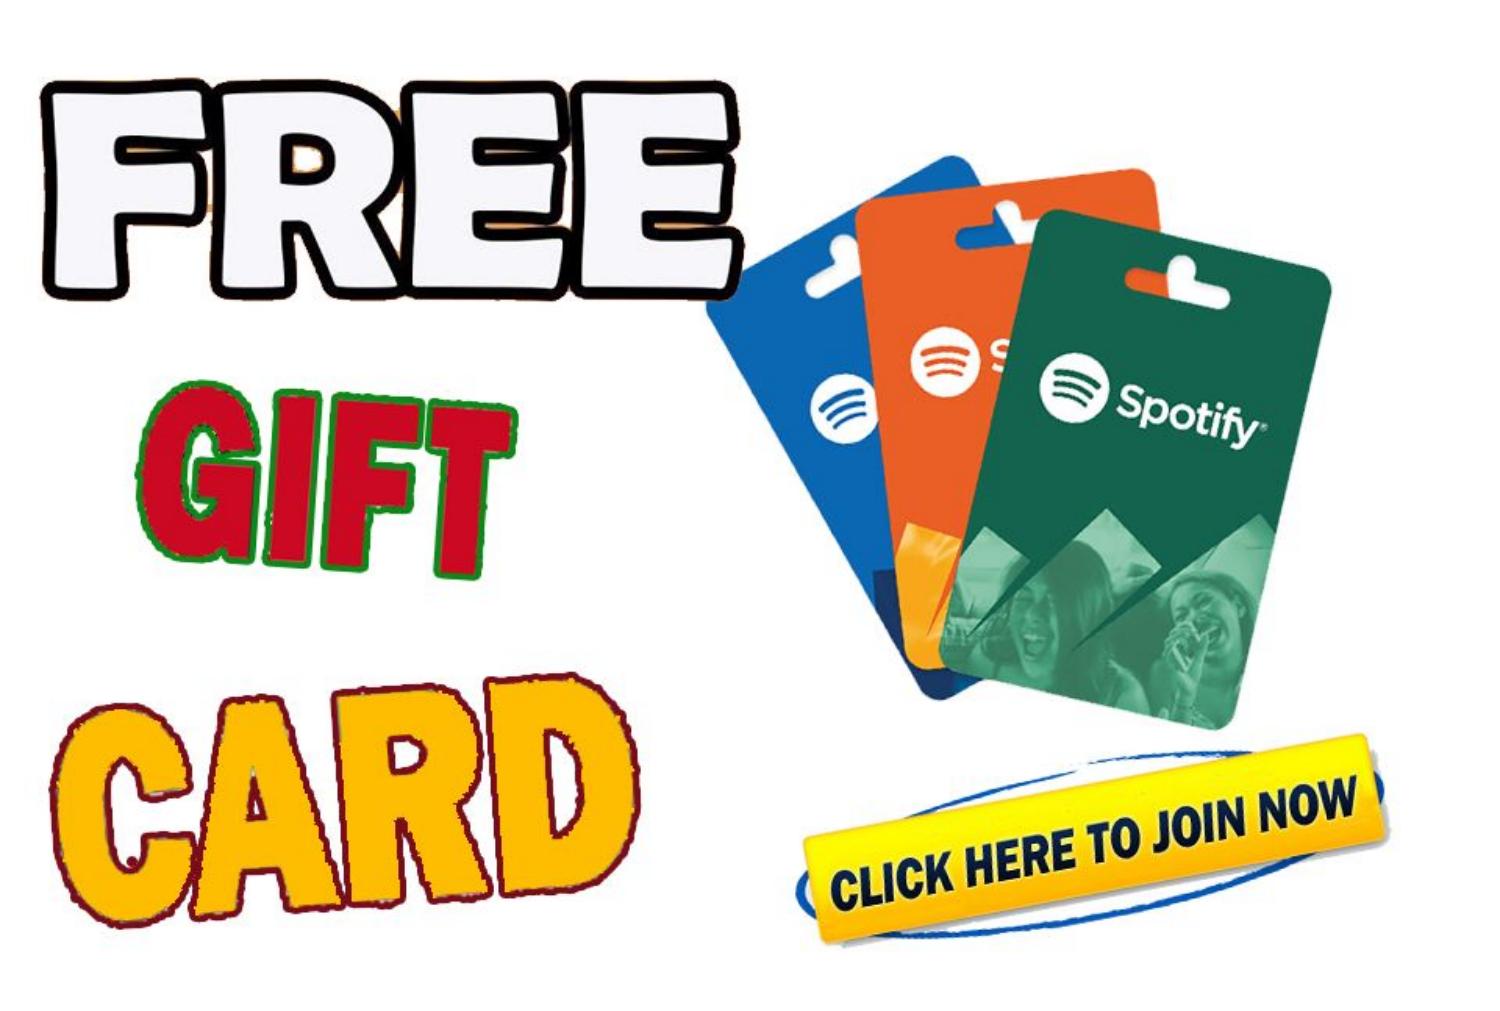 Solved: Use gift card after trial period - The Spotify Community